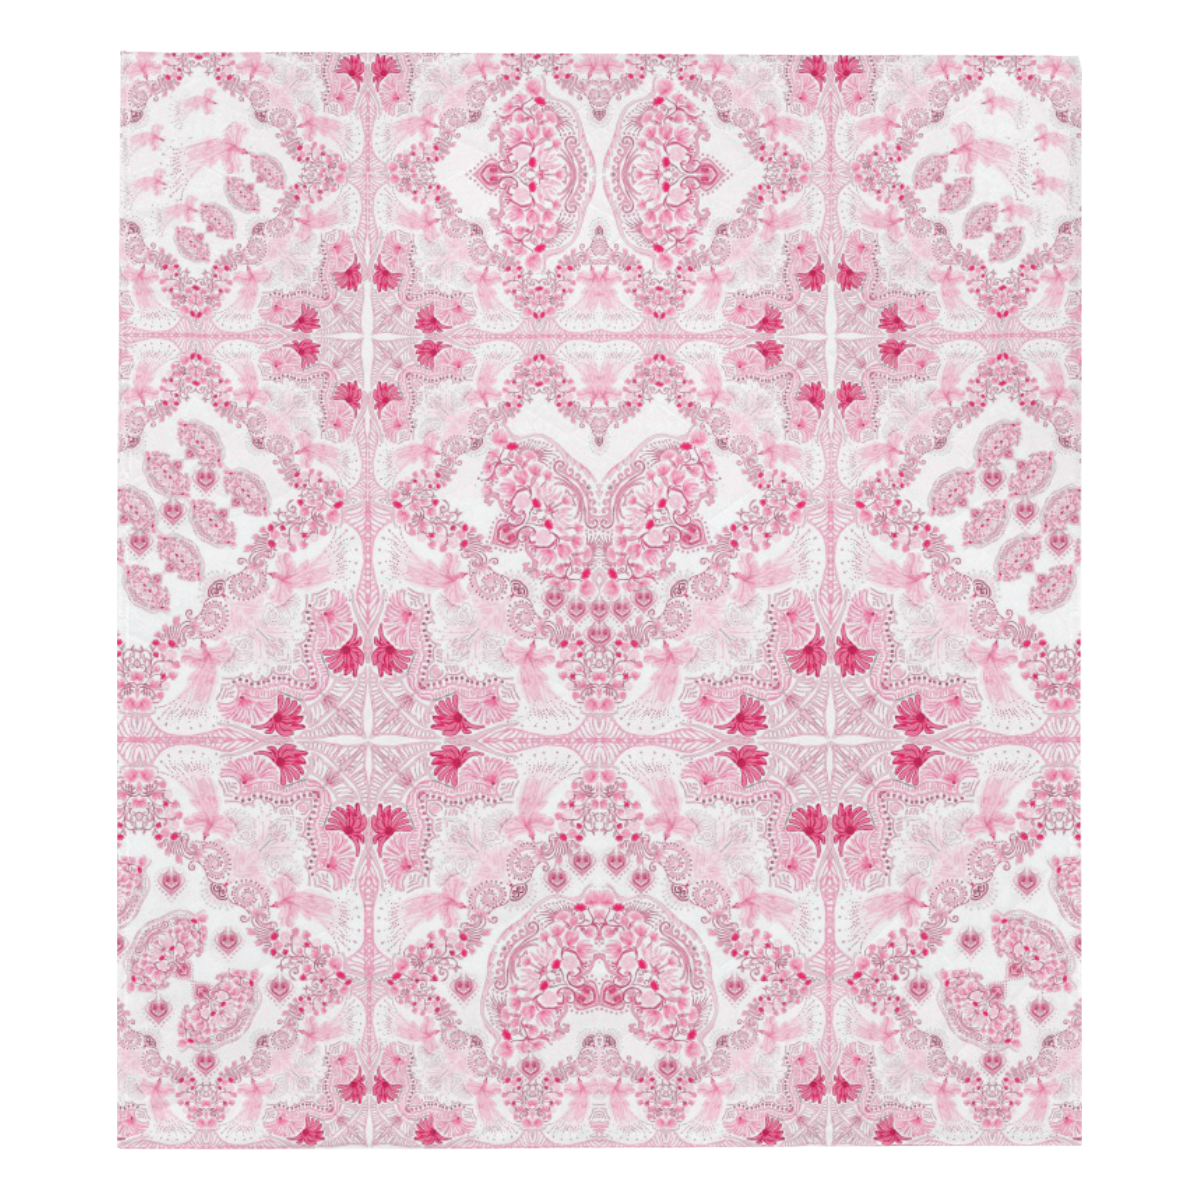 sweet nature-fuxia Quilt 70"x80"